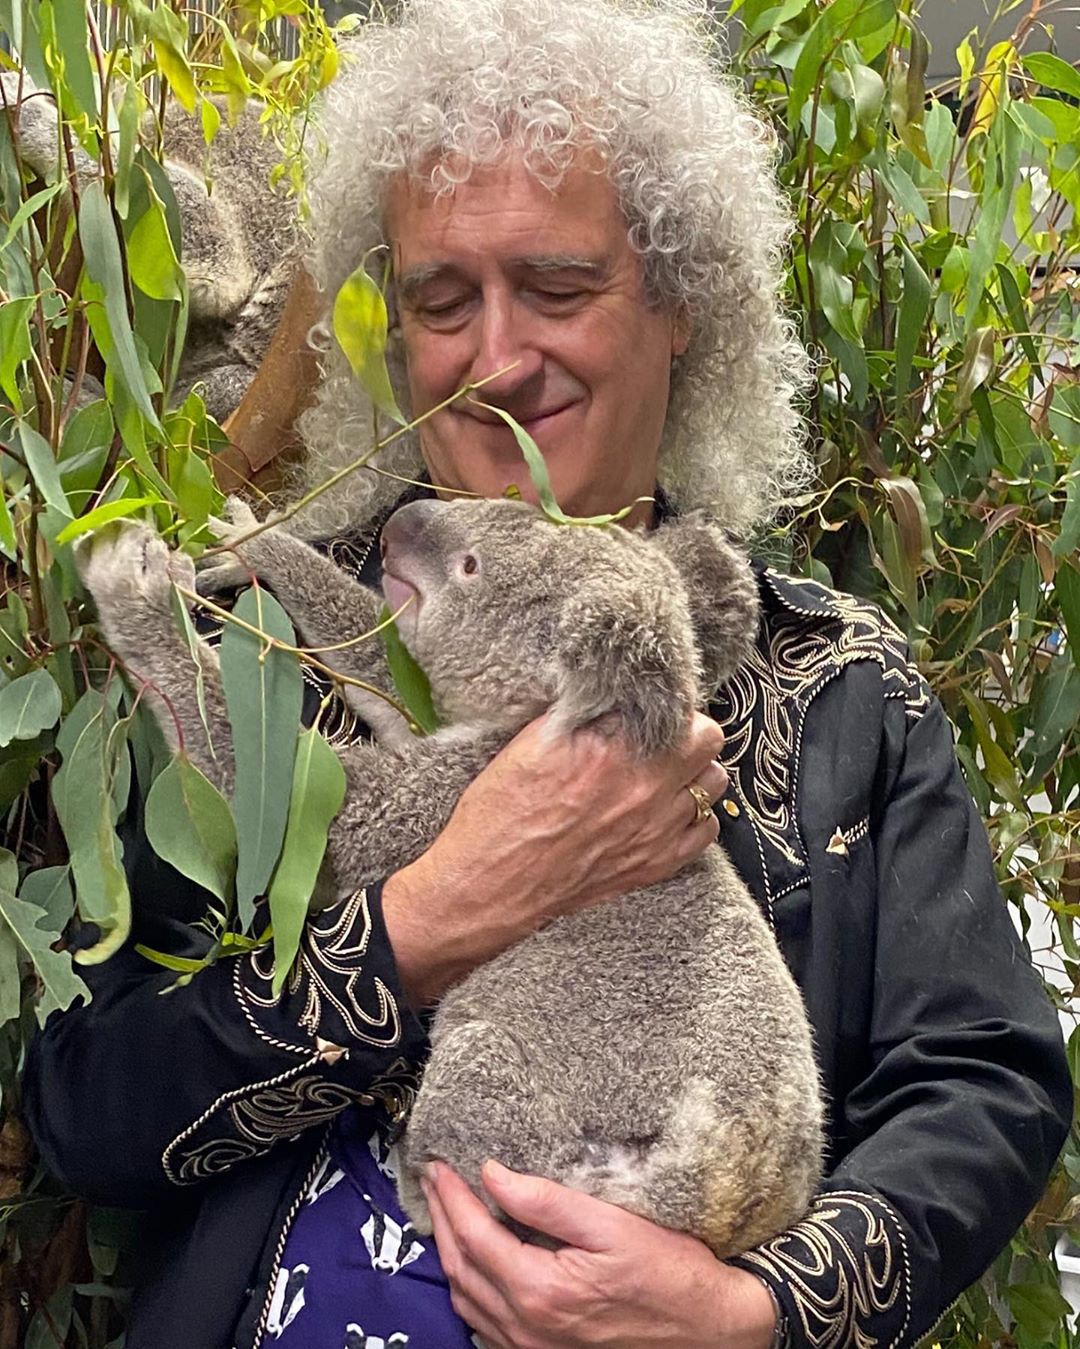 Queen’s Brian May Shares ‘Precious Moment’ with Koala Before Australia